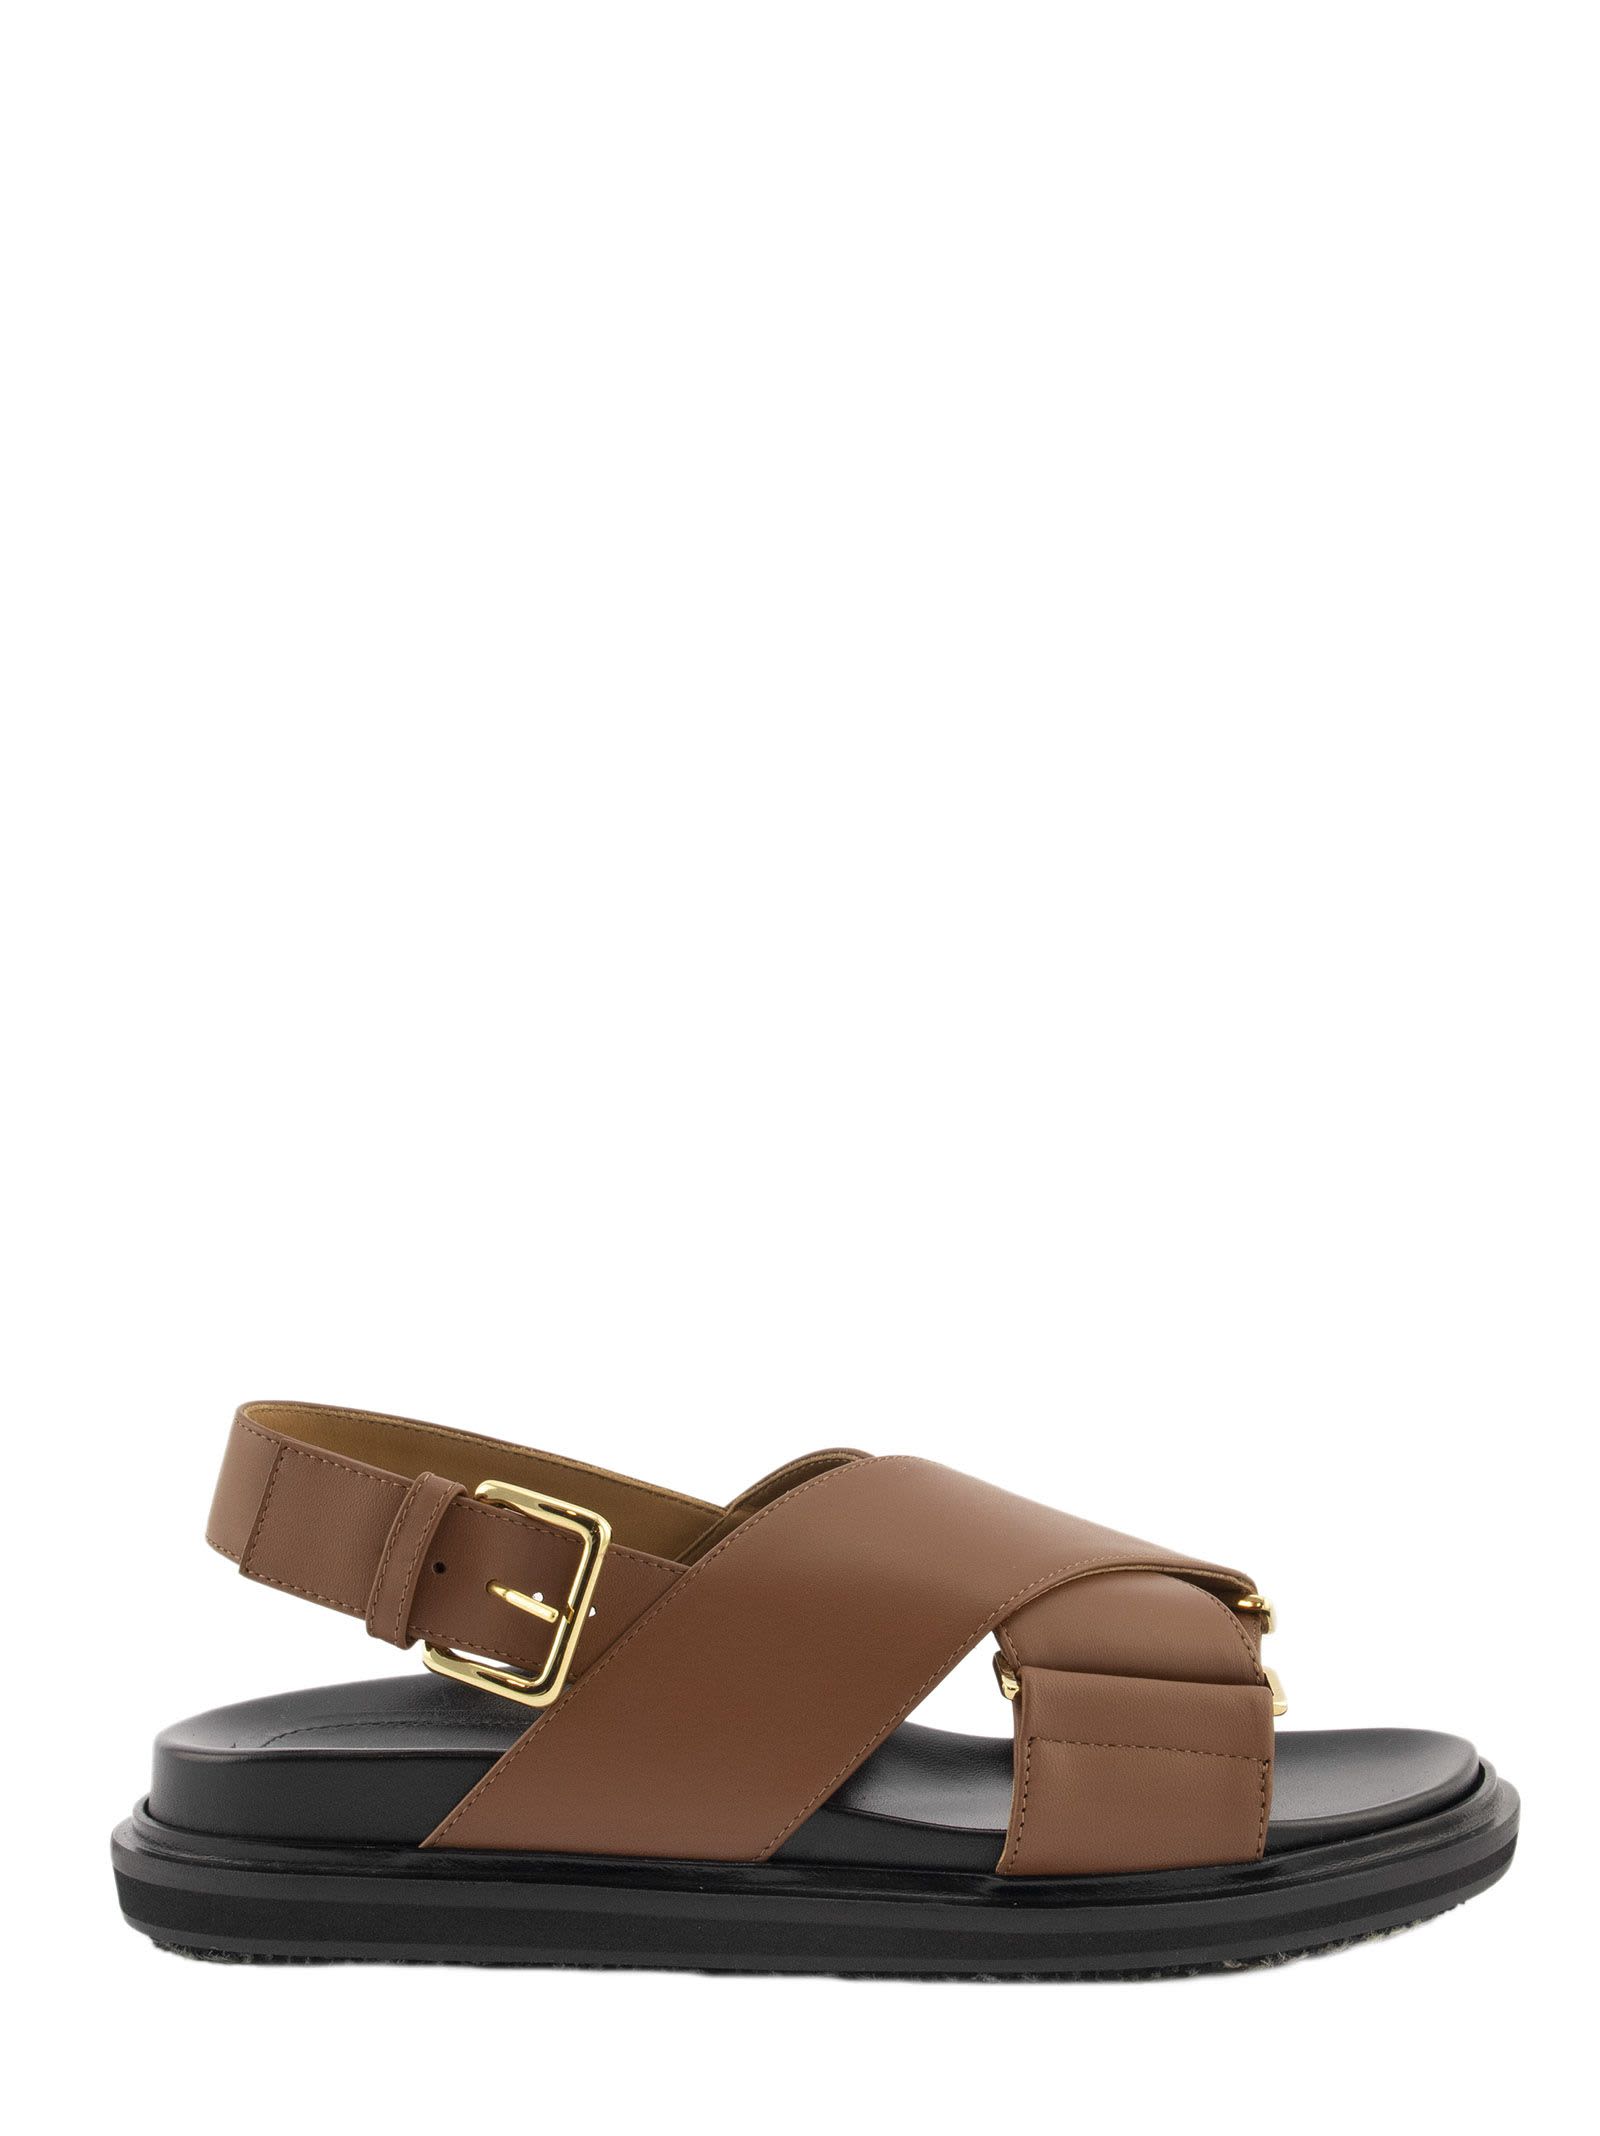 Buy Marni Criss-cross Fussbett In Brown Calfskin online, shop Marni shoes with free shipping